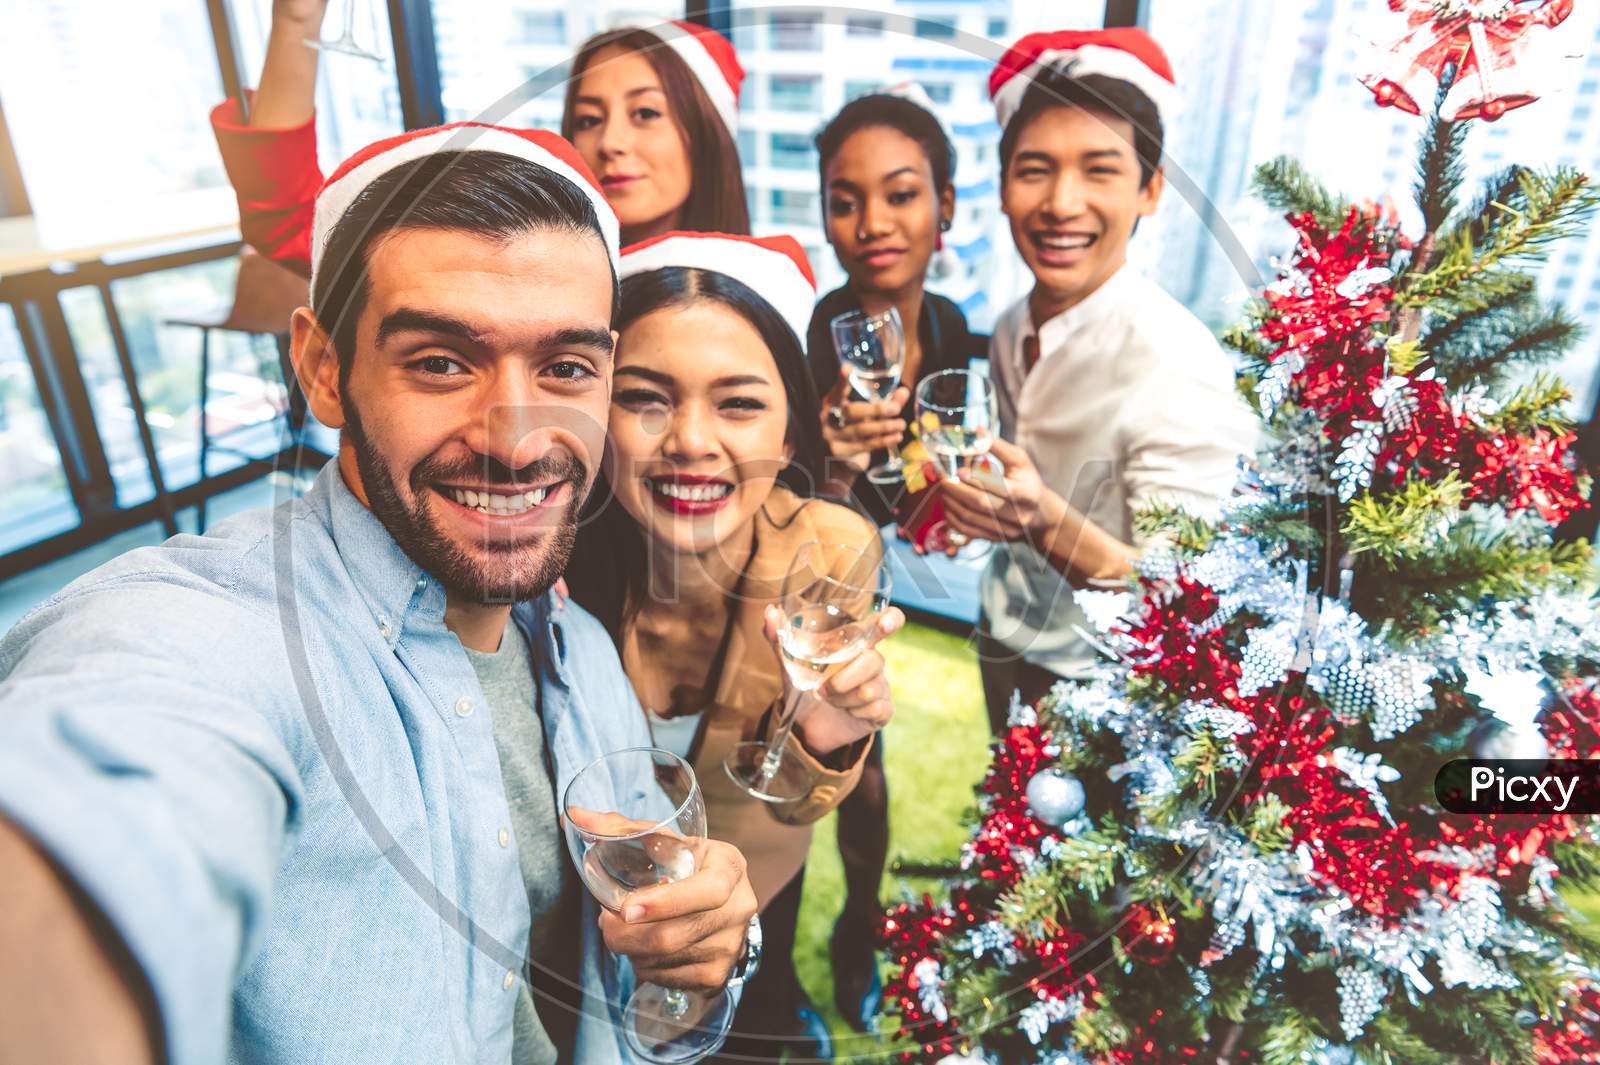 Working People Self Portrait Of Mixed Race Friends Celebrating For Merry Christmas And Happy New Year Party 2020 In Working Office. Multiracial Diversity Young Business Group Selfie By Phone Camera